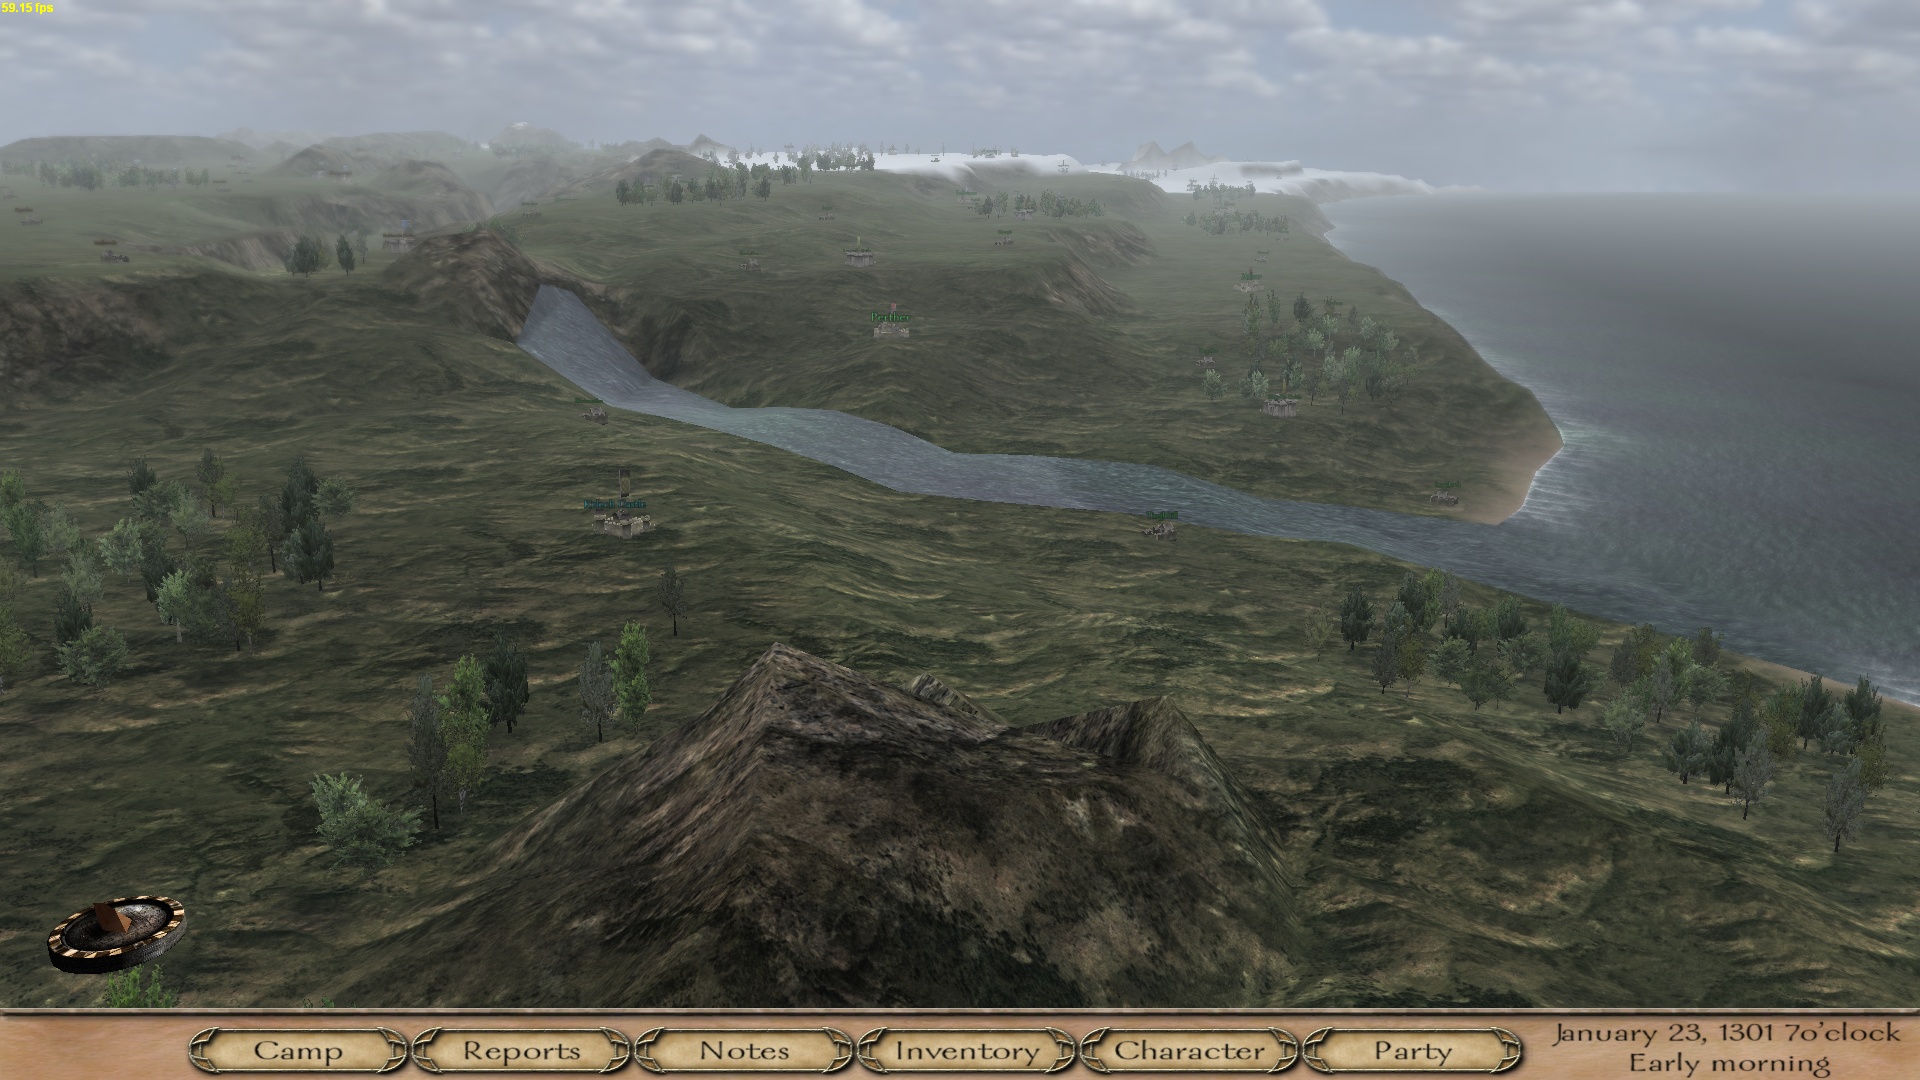 mount and blade sword of damocles warlords